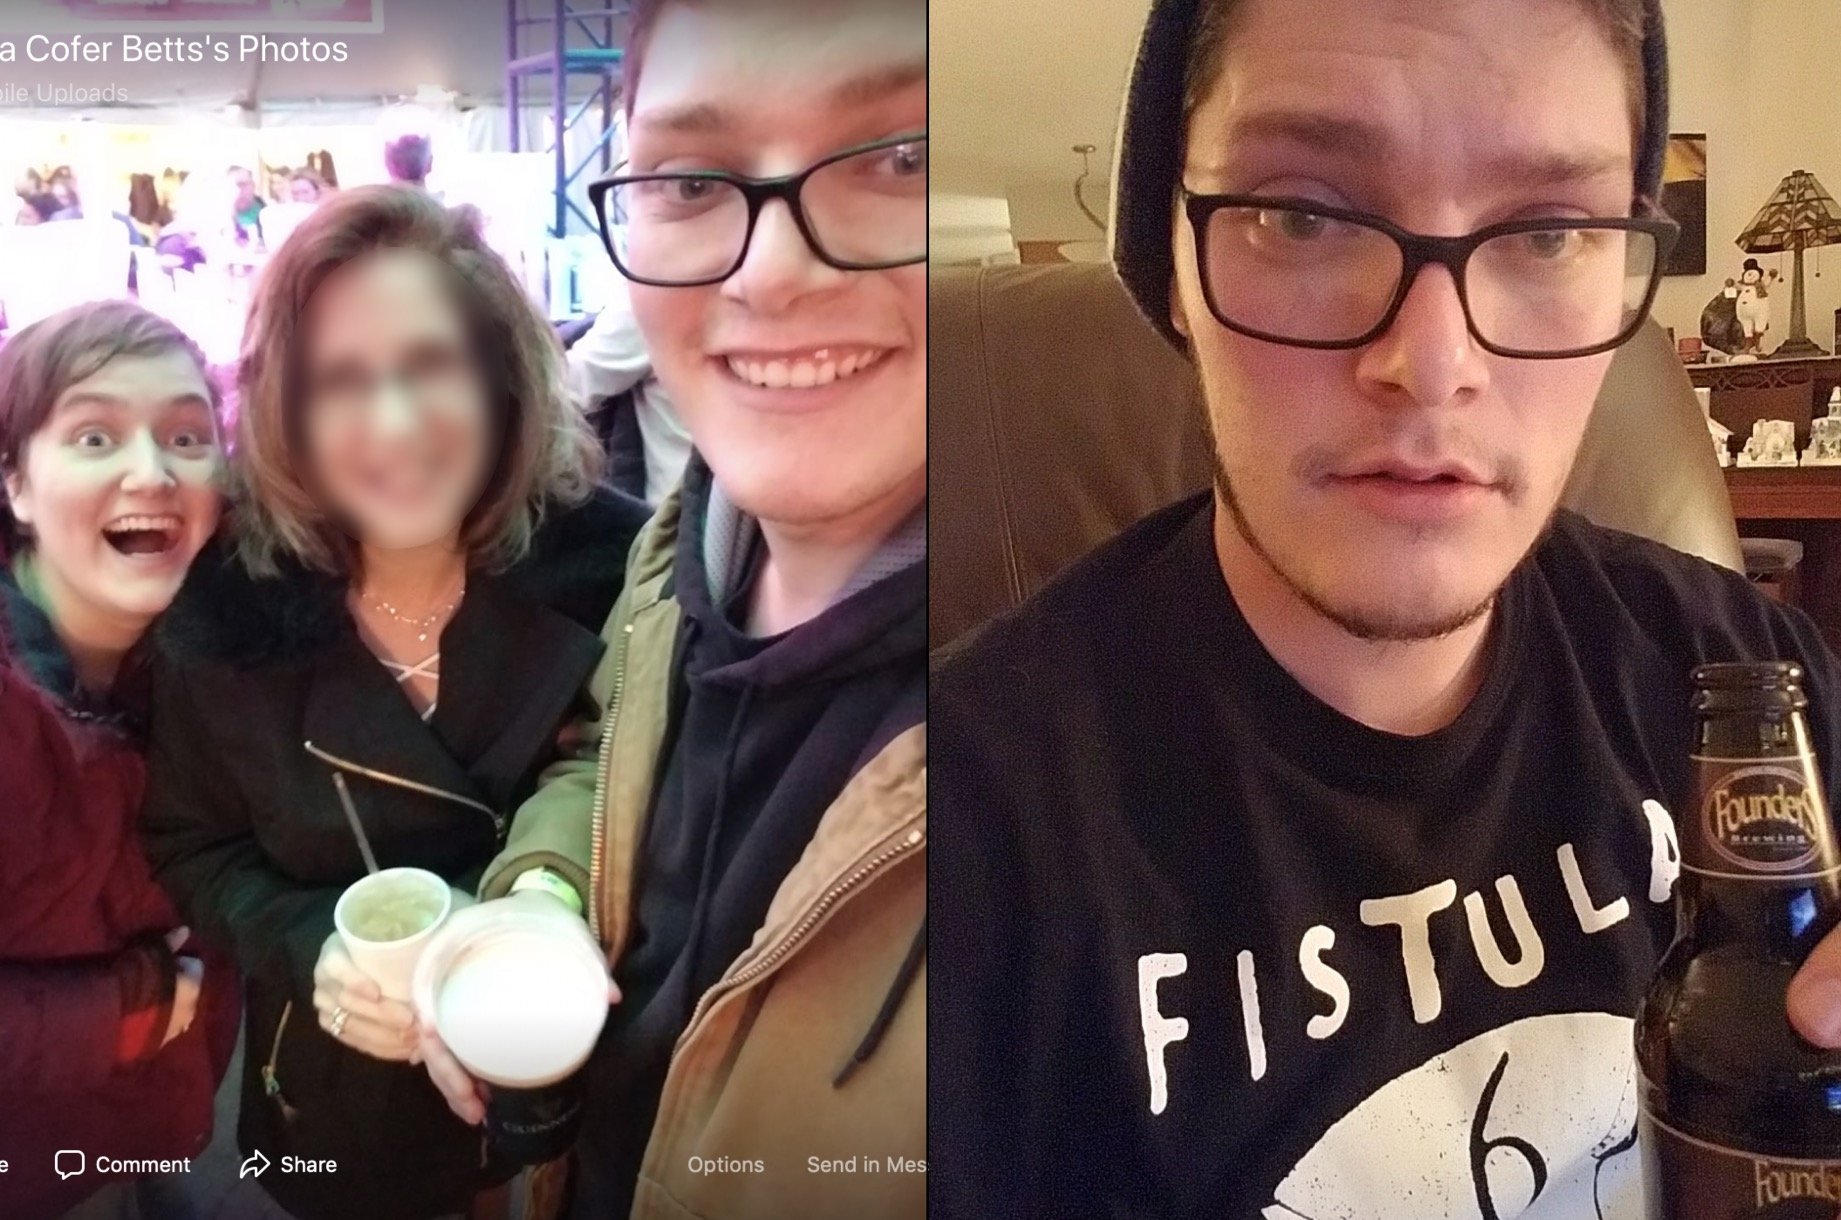 The photo on the left, taken from Betts's mother's Facebook page, matches the one on the right, taken from the Twitter account. (Facebook Screenshot Moria Cofer Betts/Twitter Screenshot @iamthespookster)